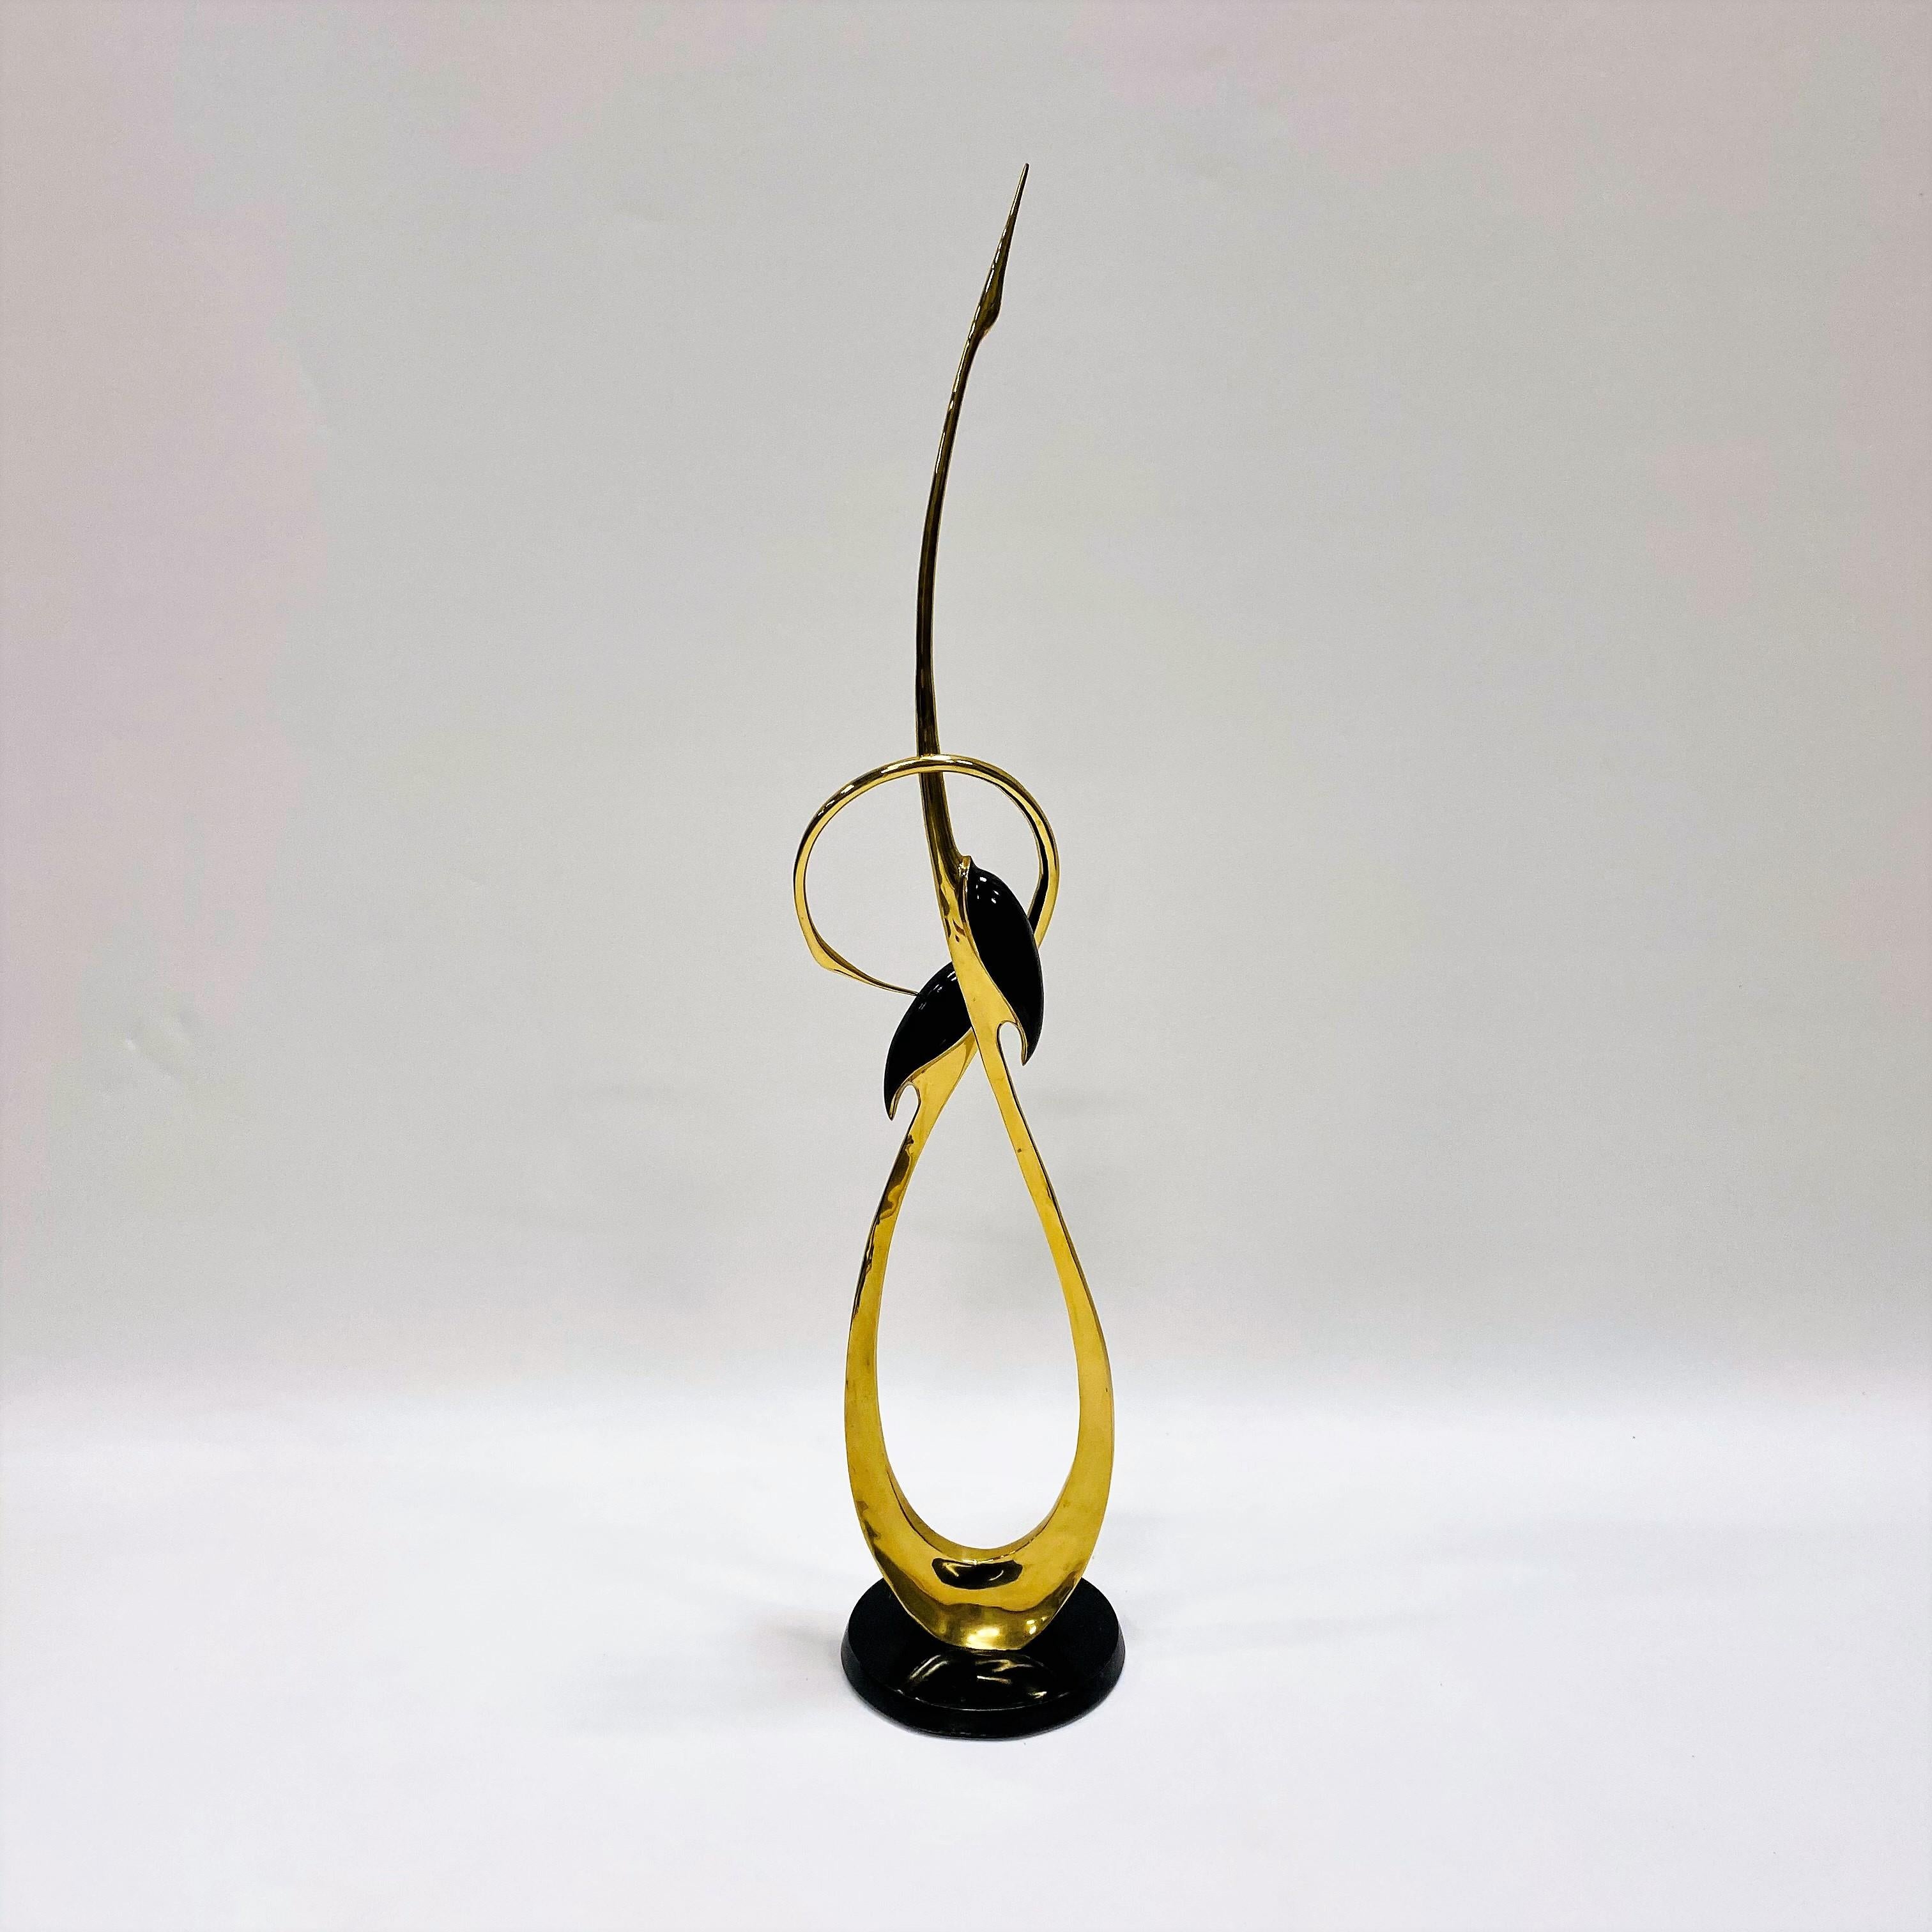 Tall Brass Entwined Cranes Sculpture by Boris Lovet Lorski For Sale 2